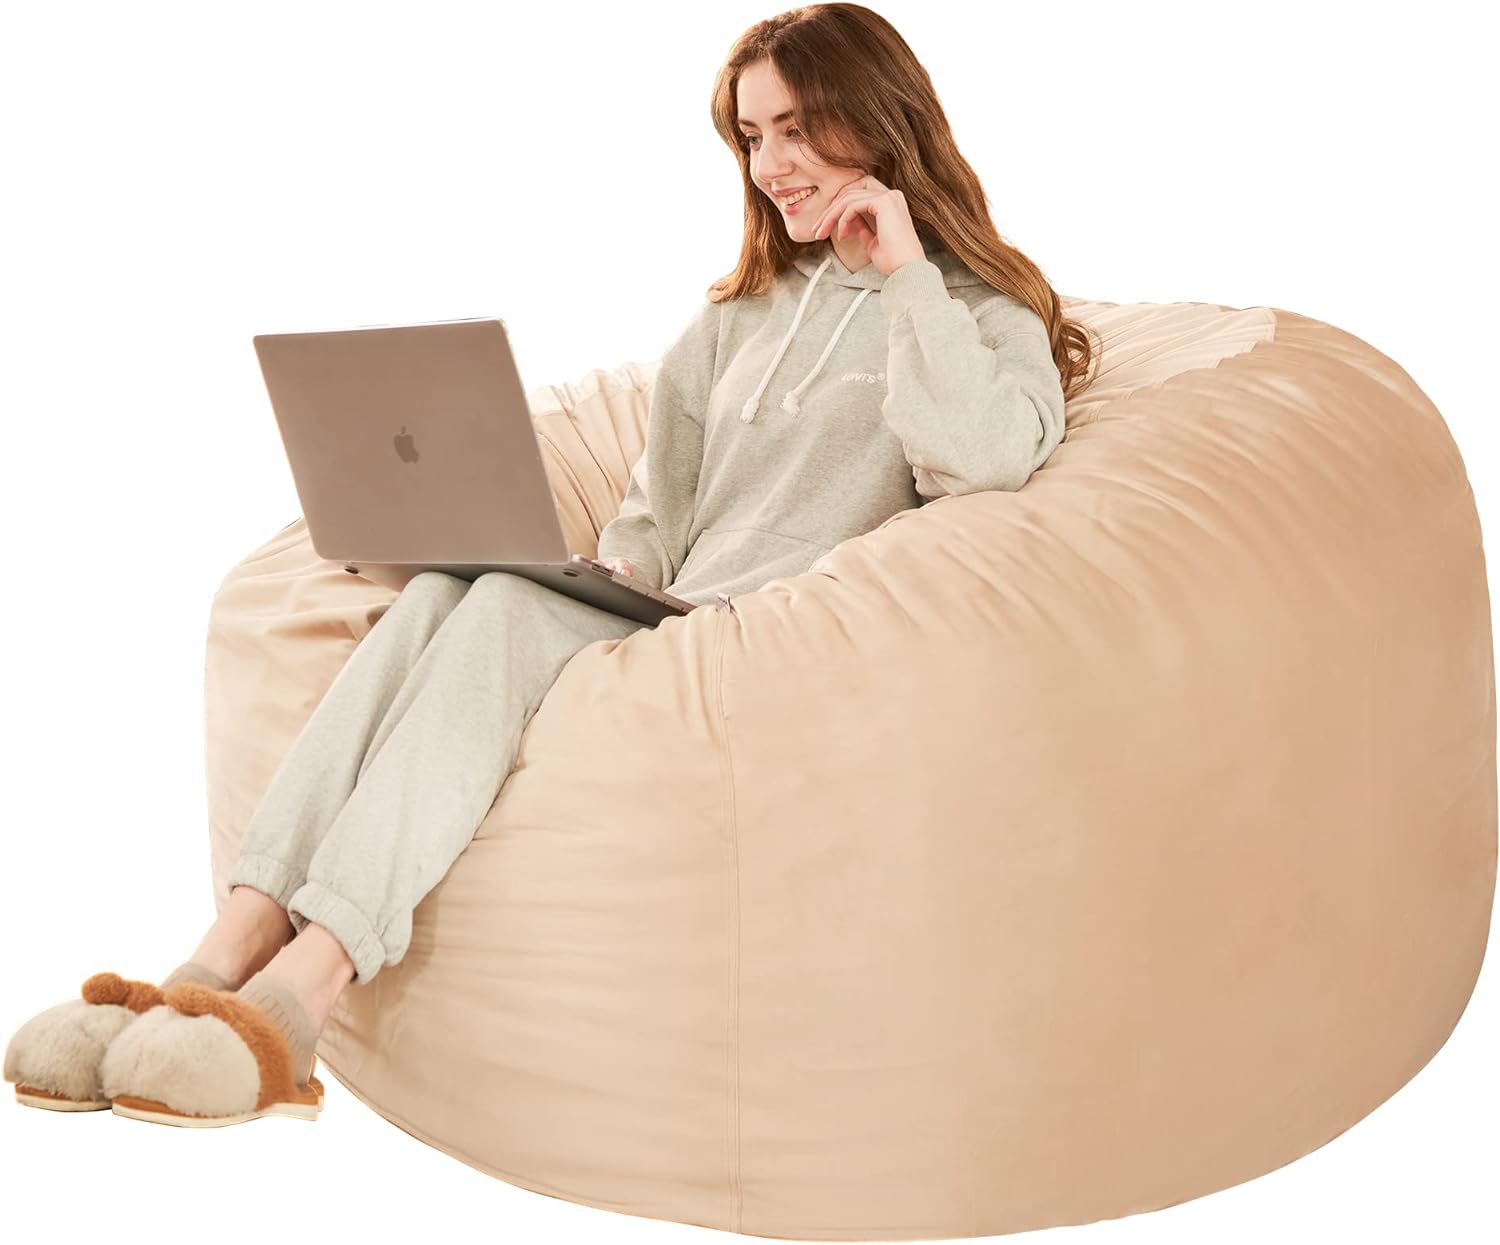 HABUTWAY Bean Bag Chair: Giant 4' Memory Foam Furniture Bean Bag Chairs for Adults with Microfiber Cover - 4Ft, Khaki